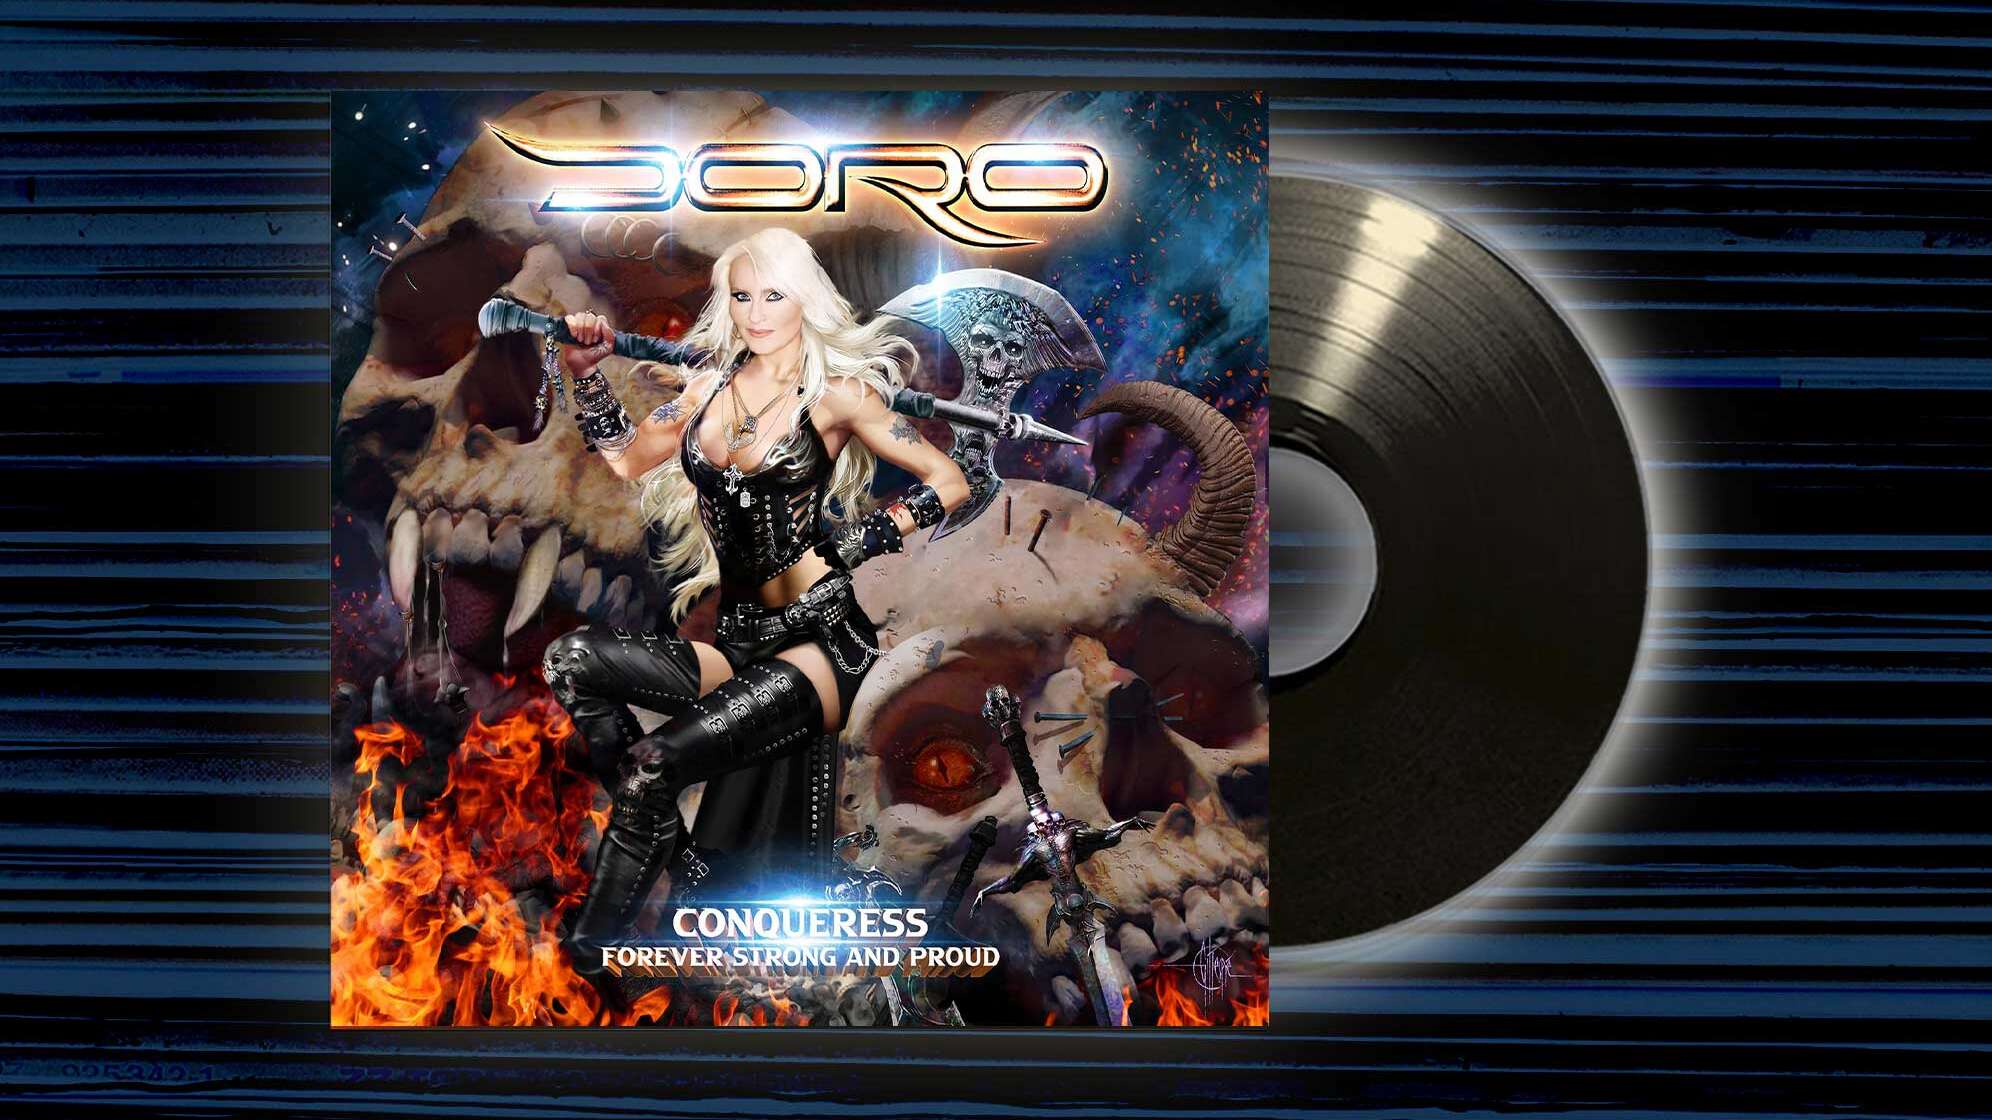 Das Albumcover von Doro "Conqueress - Forever Strong And Proud"